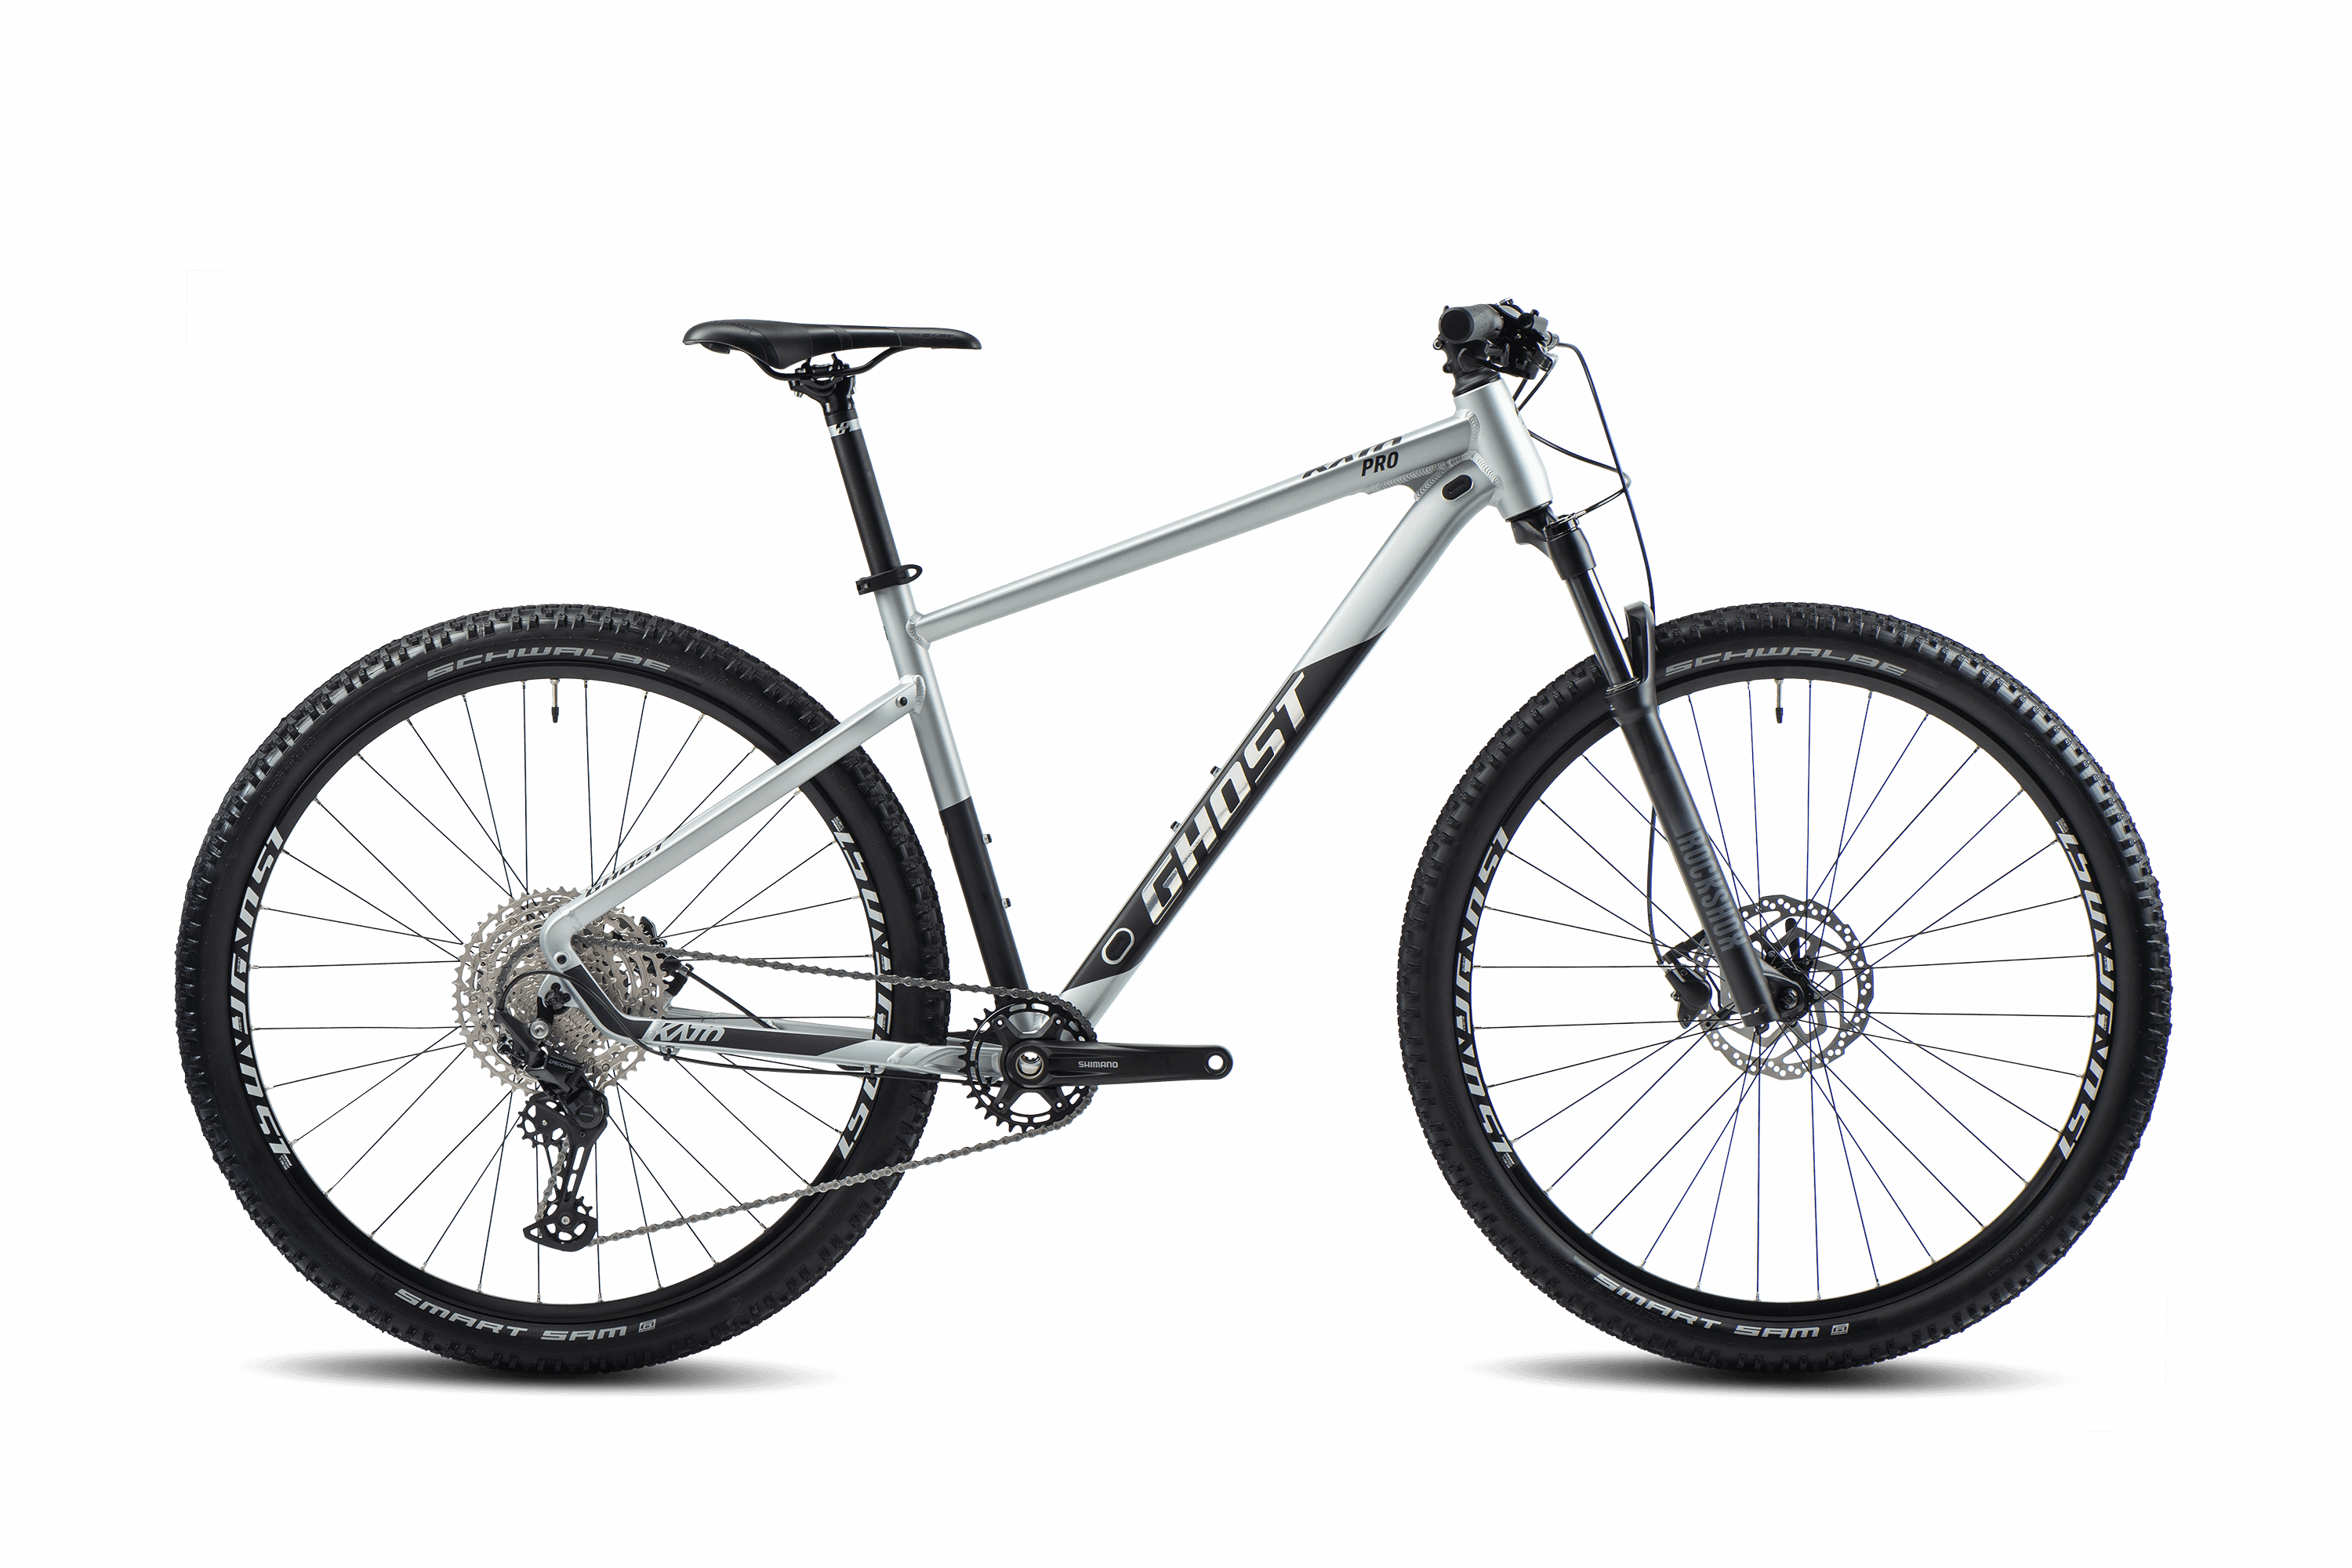 GHOST Mountain Bikes Discover agile models for any kind of terrain